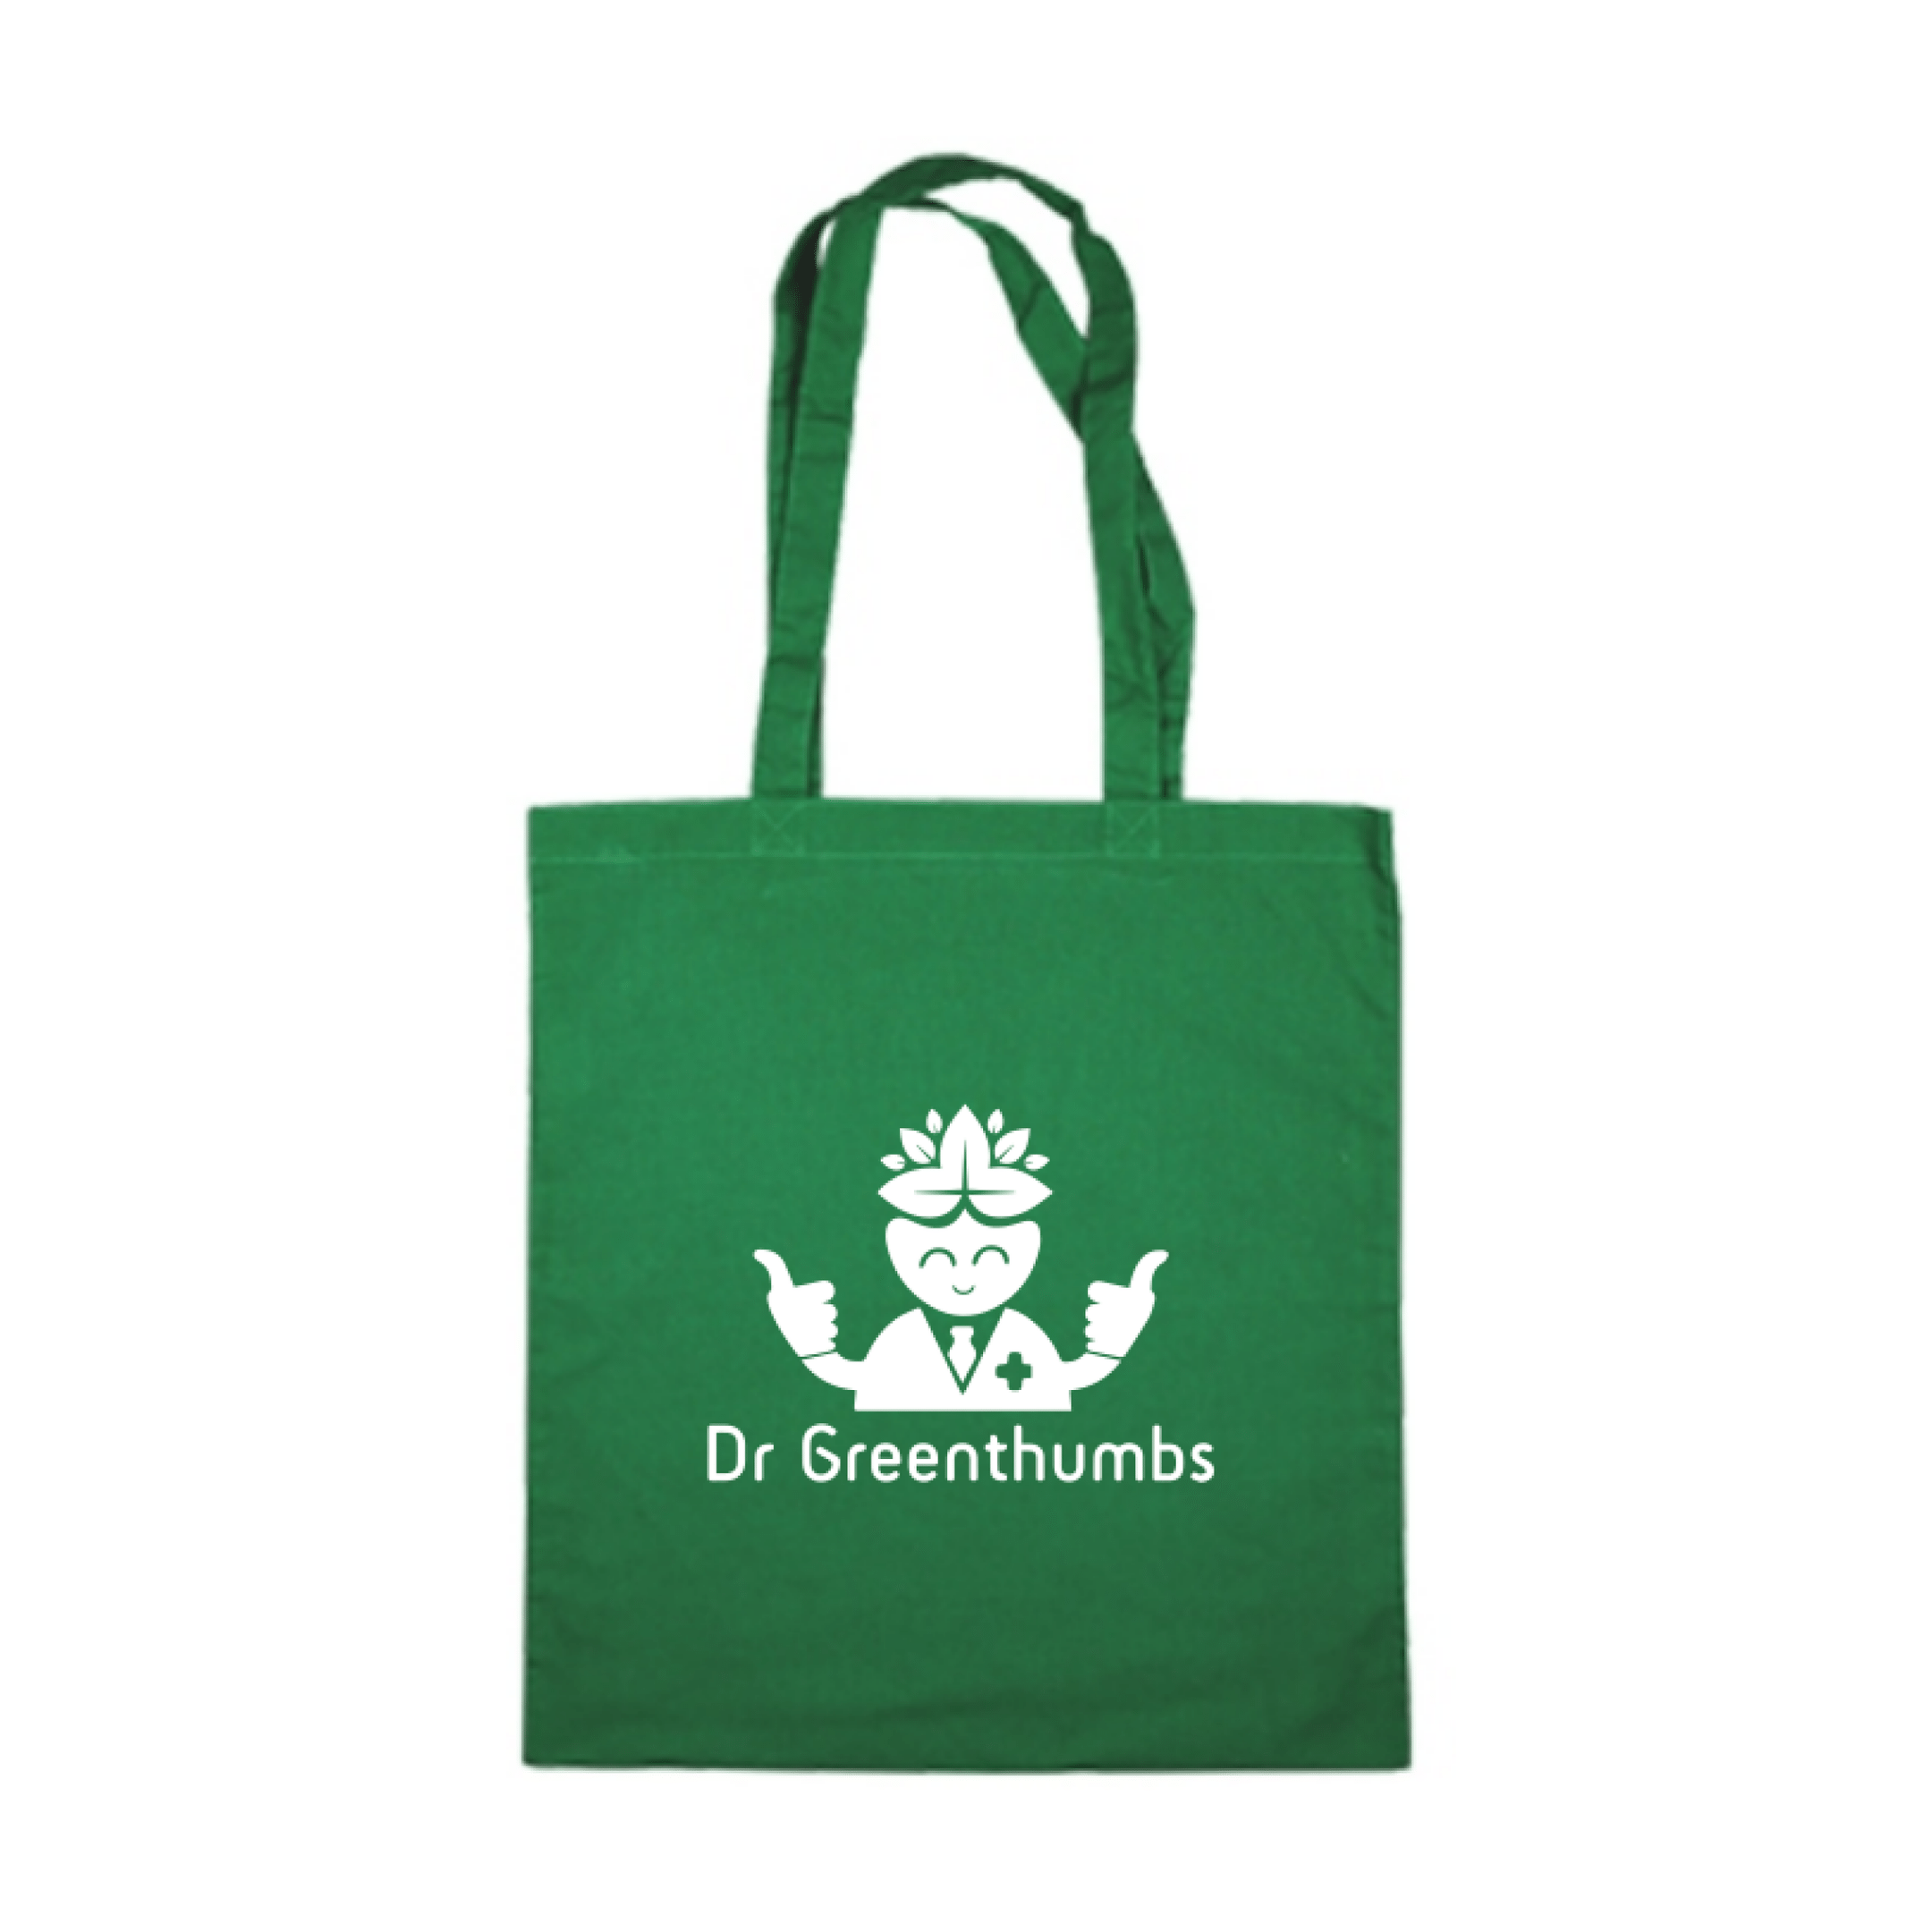 Dr Greenthumbs Free Show Bag When You Spend over $250